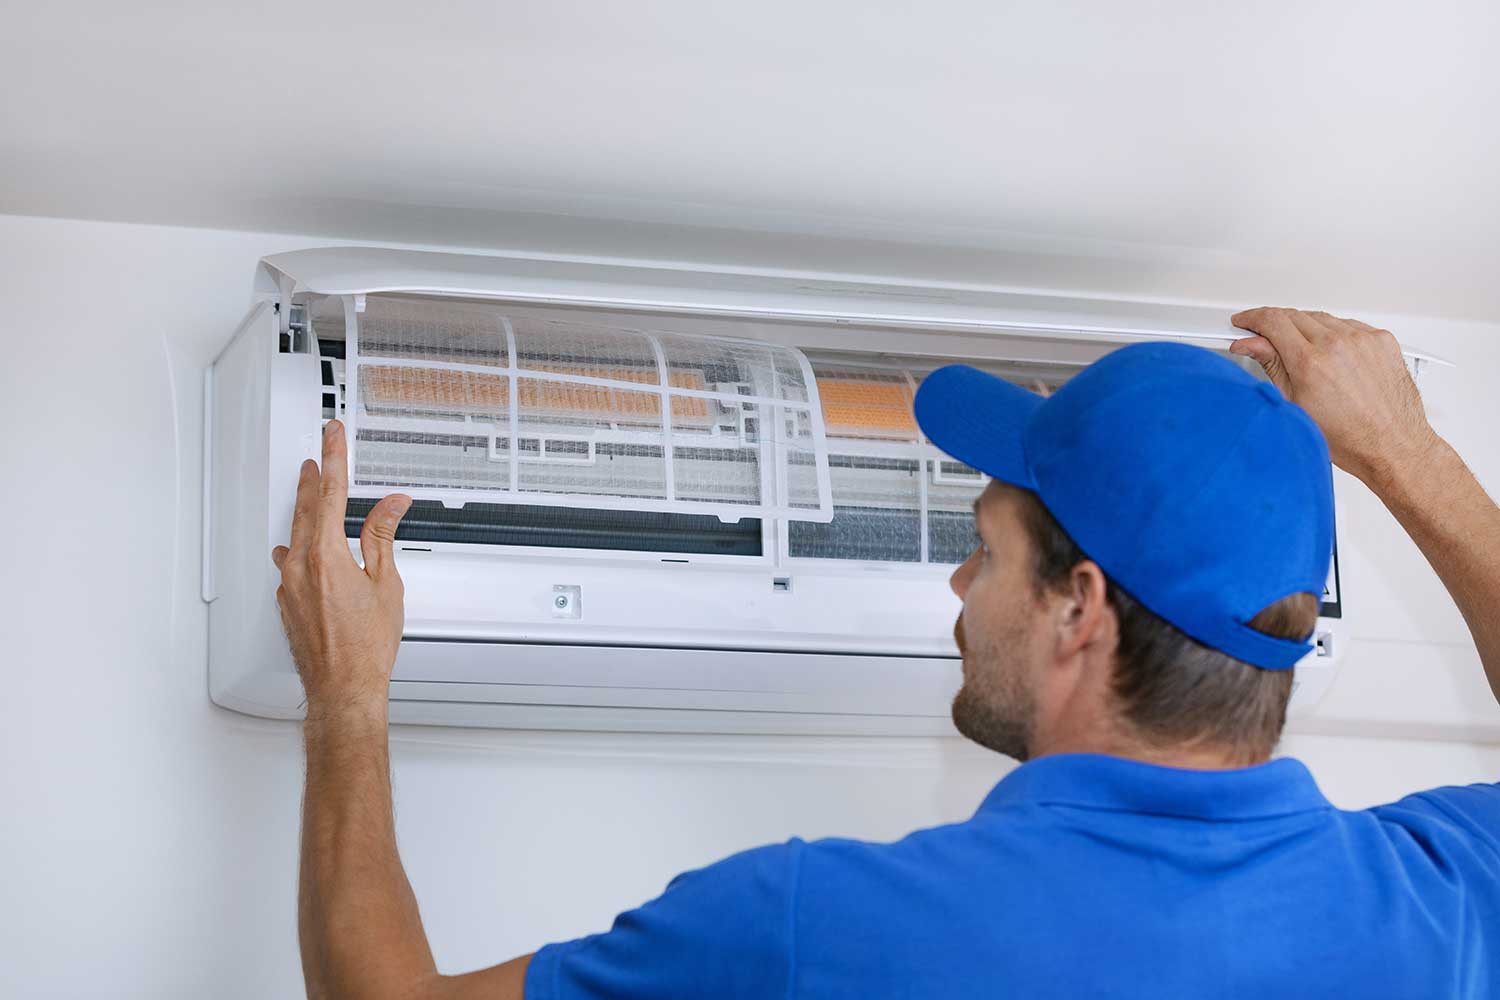 Being an Heating, Ventilation, as well as A/C specialist as well as seeing a horrible non repaird Heating, Ventilation, as well as A/C system.